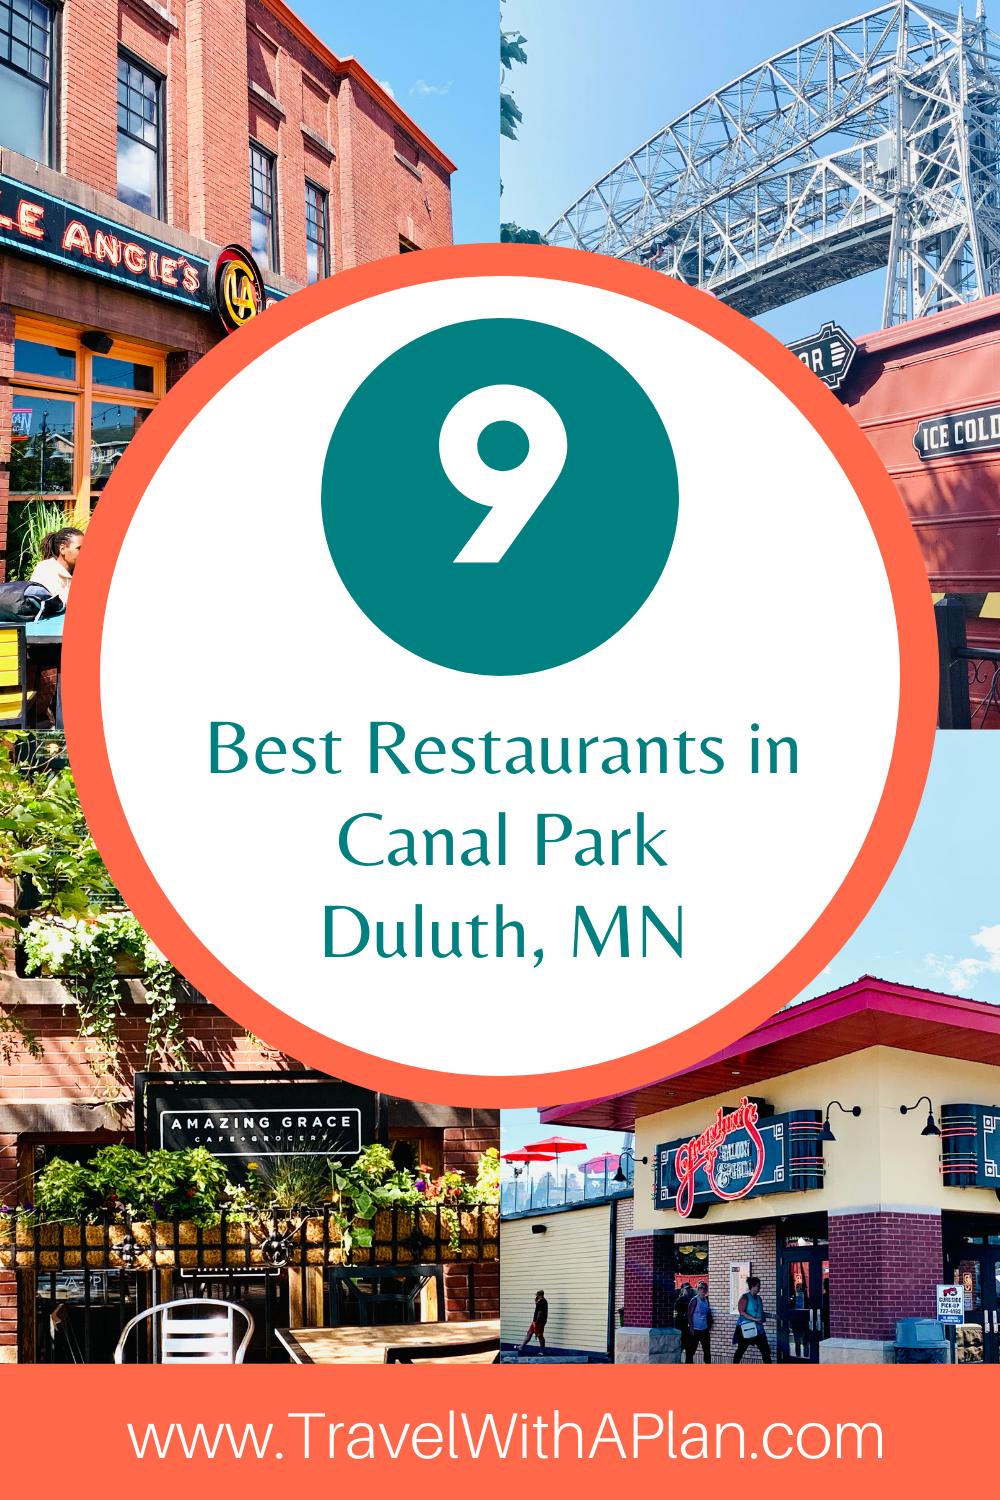 The 9 Best Restaurants in Canal Park Duluth, MN as discovered by Top US Family Travel Blog, Travel With A Plan!  #CanalPark #DuluthRestaurants #LakeSuperior